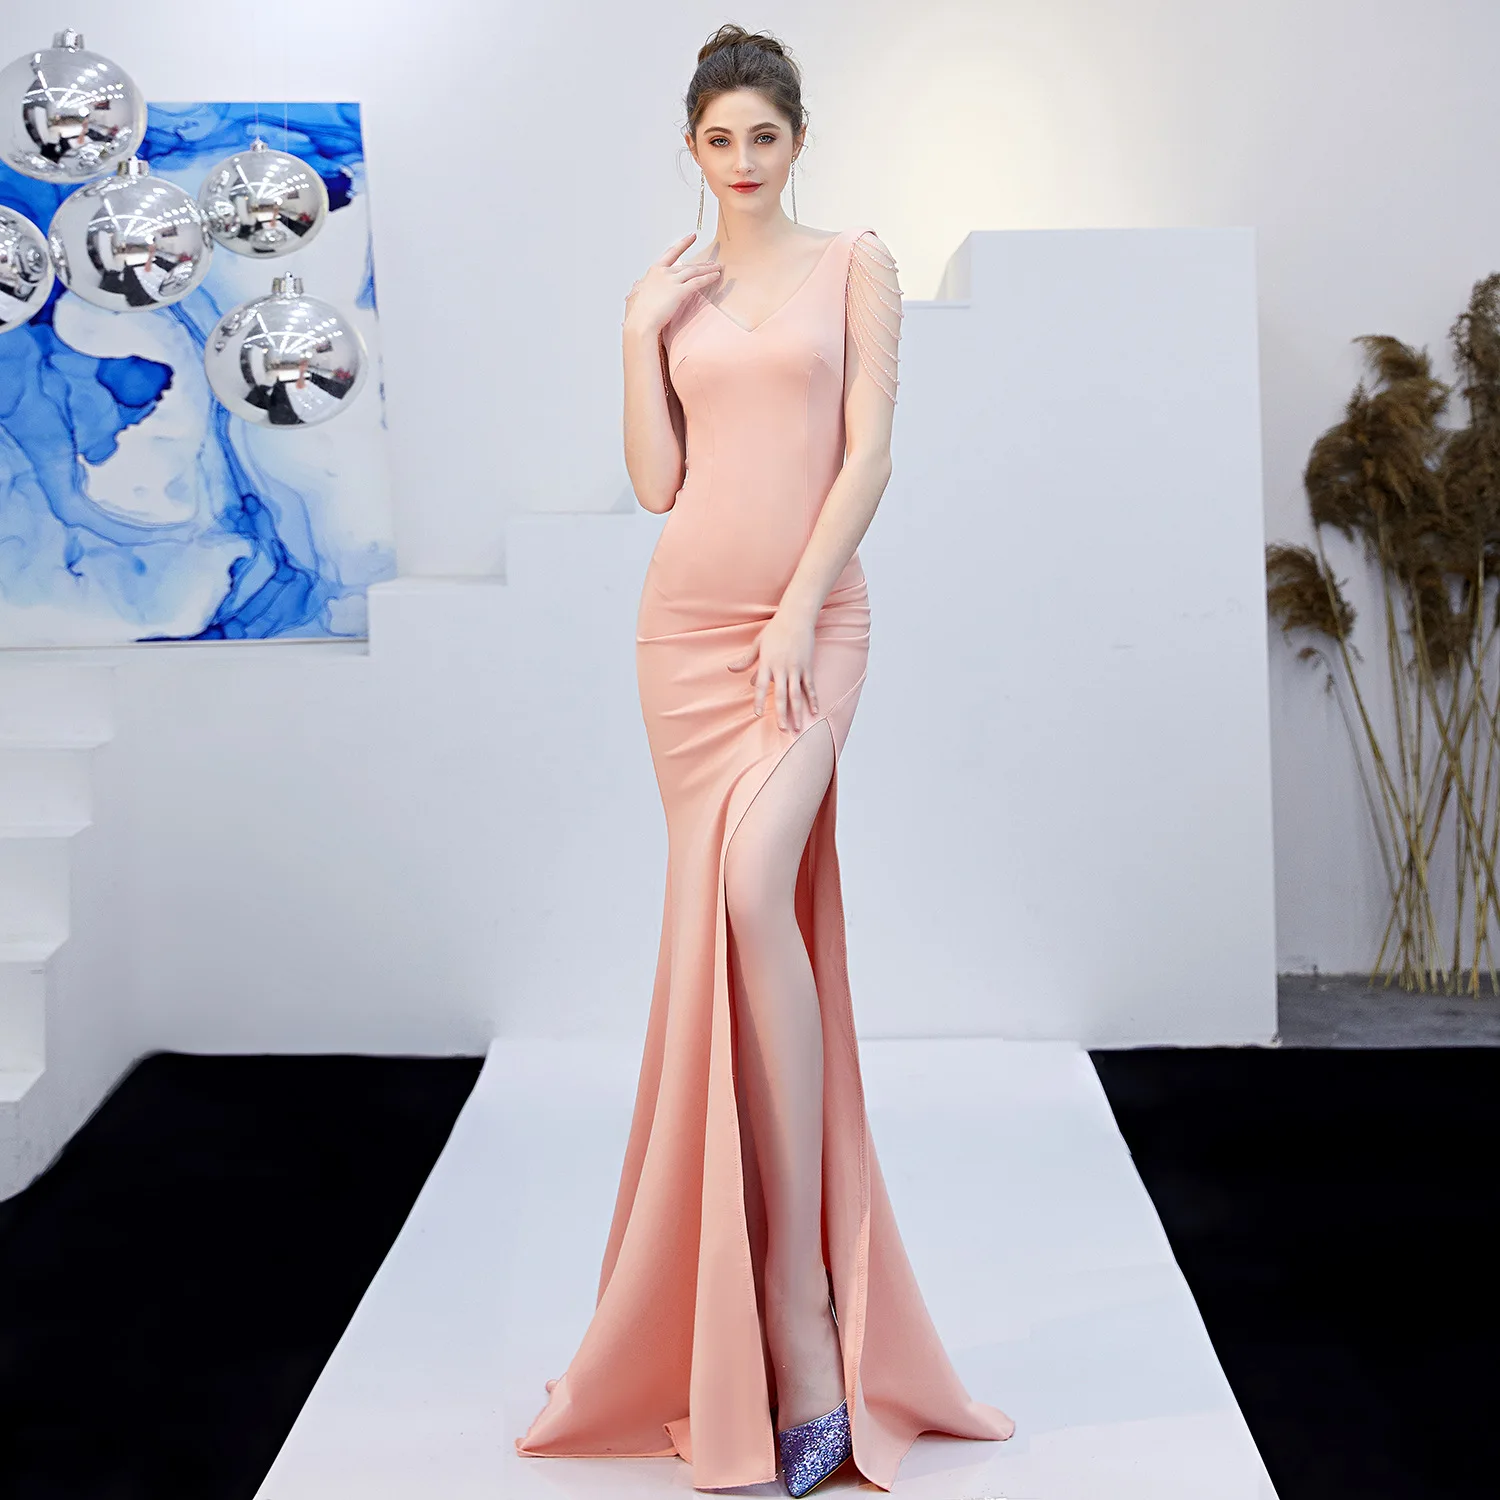 Sexiest Prom Dresses Ever - Beading Mermaid Deep V-neck Women Clothes Prom Bridesmaid Evening Dress  Blue Fishtail Party Wedding Dress - Buy Evening Dresses,Elegant Black  Evening Dress Porn,Prom Dresses 2021 Evening Gowns Sexy Product on  Alibaba.com